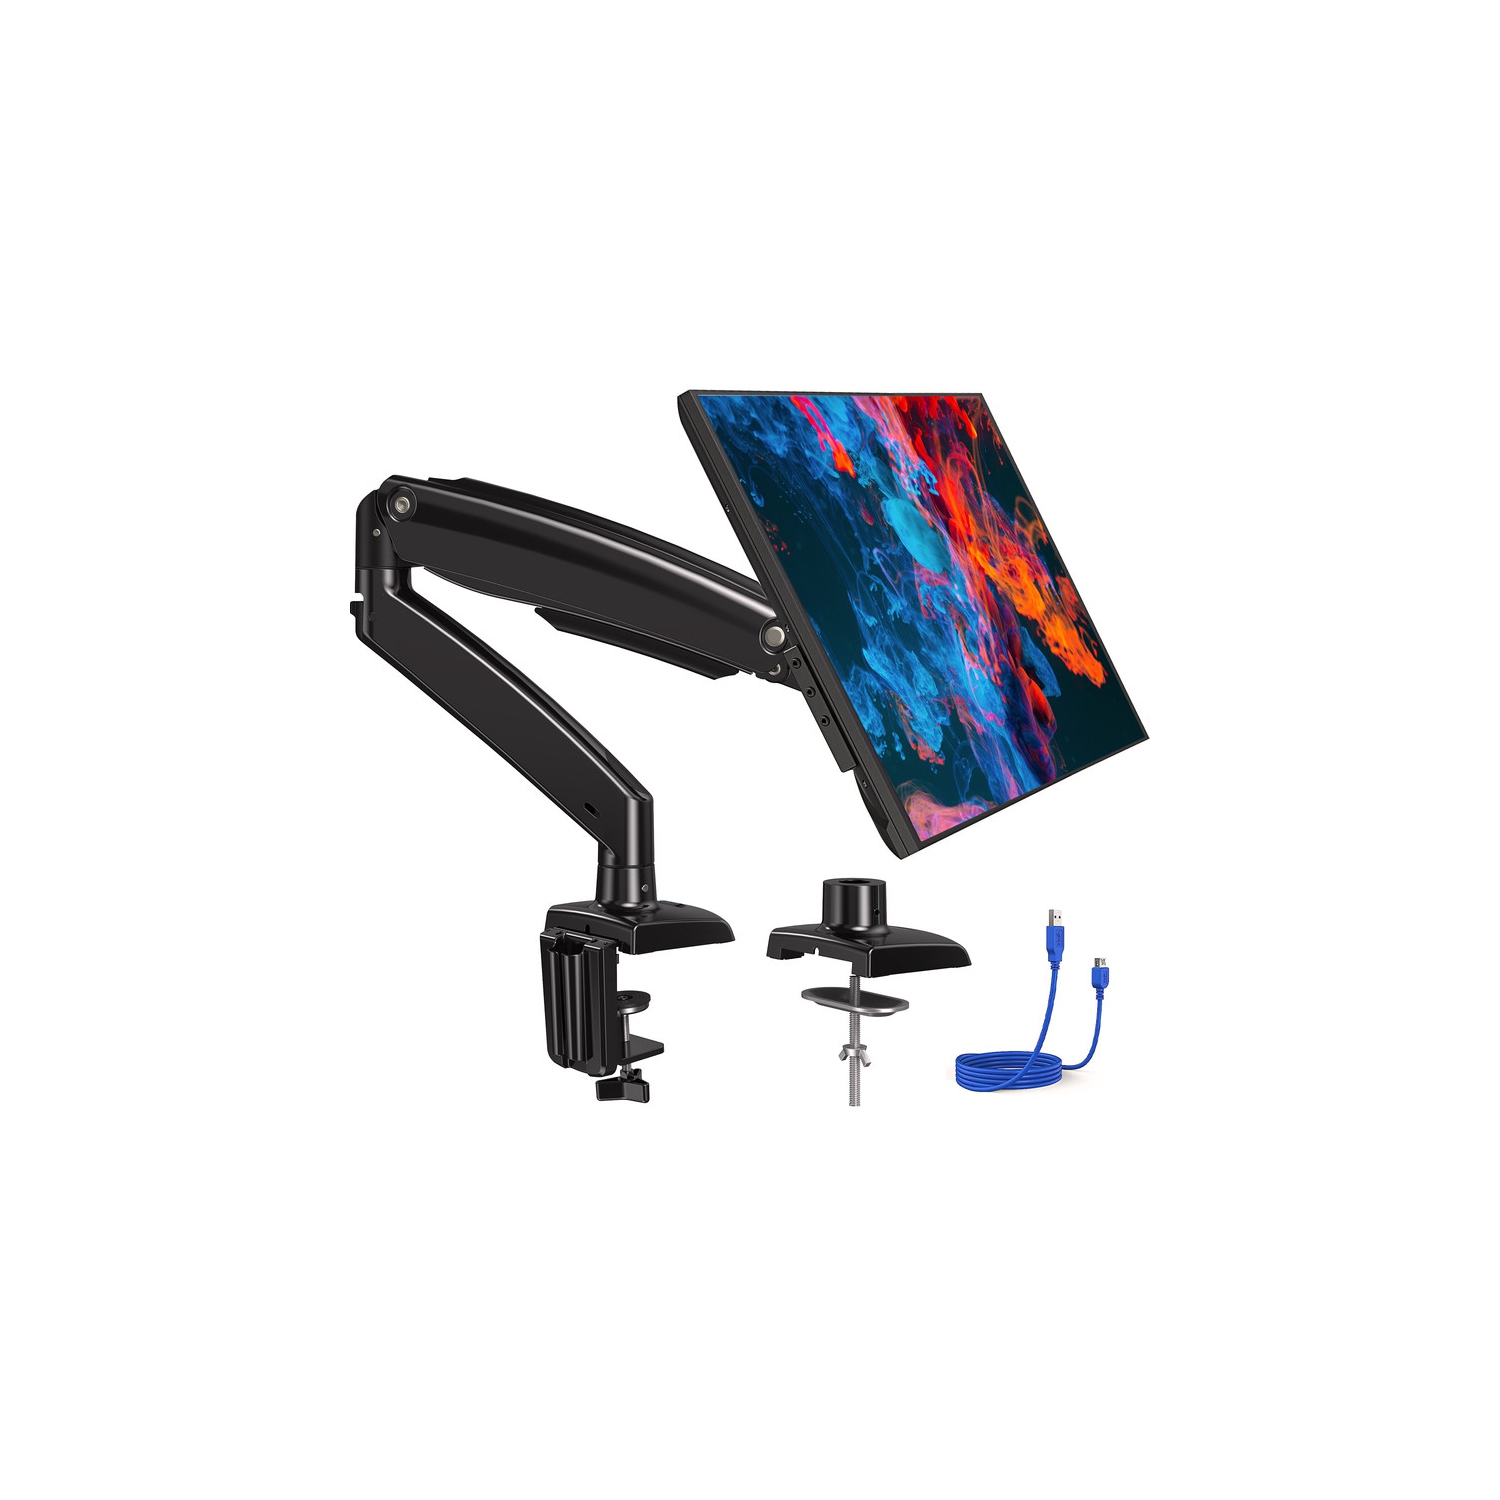 HUANUO Premium Gas Spring Monitor Arm, With Full Motion Adjustability Desk Mount Fits 22-35 Inch Screens